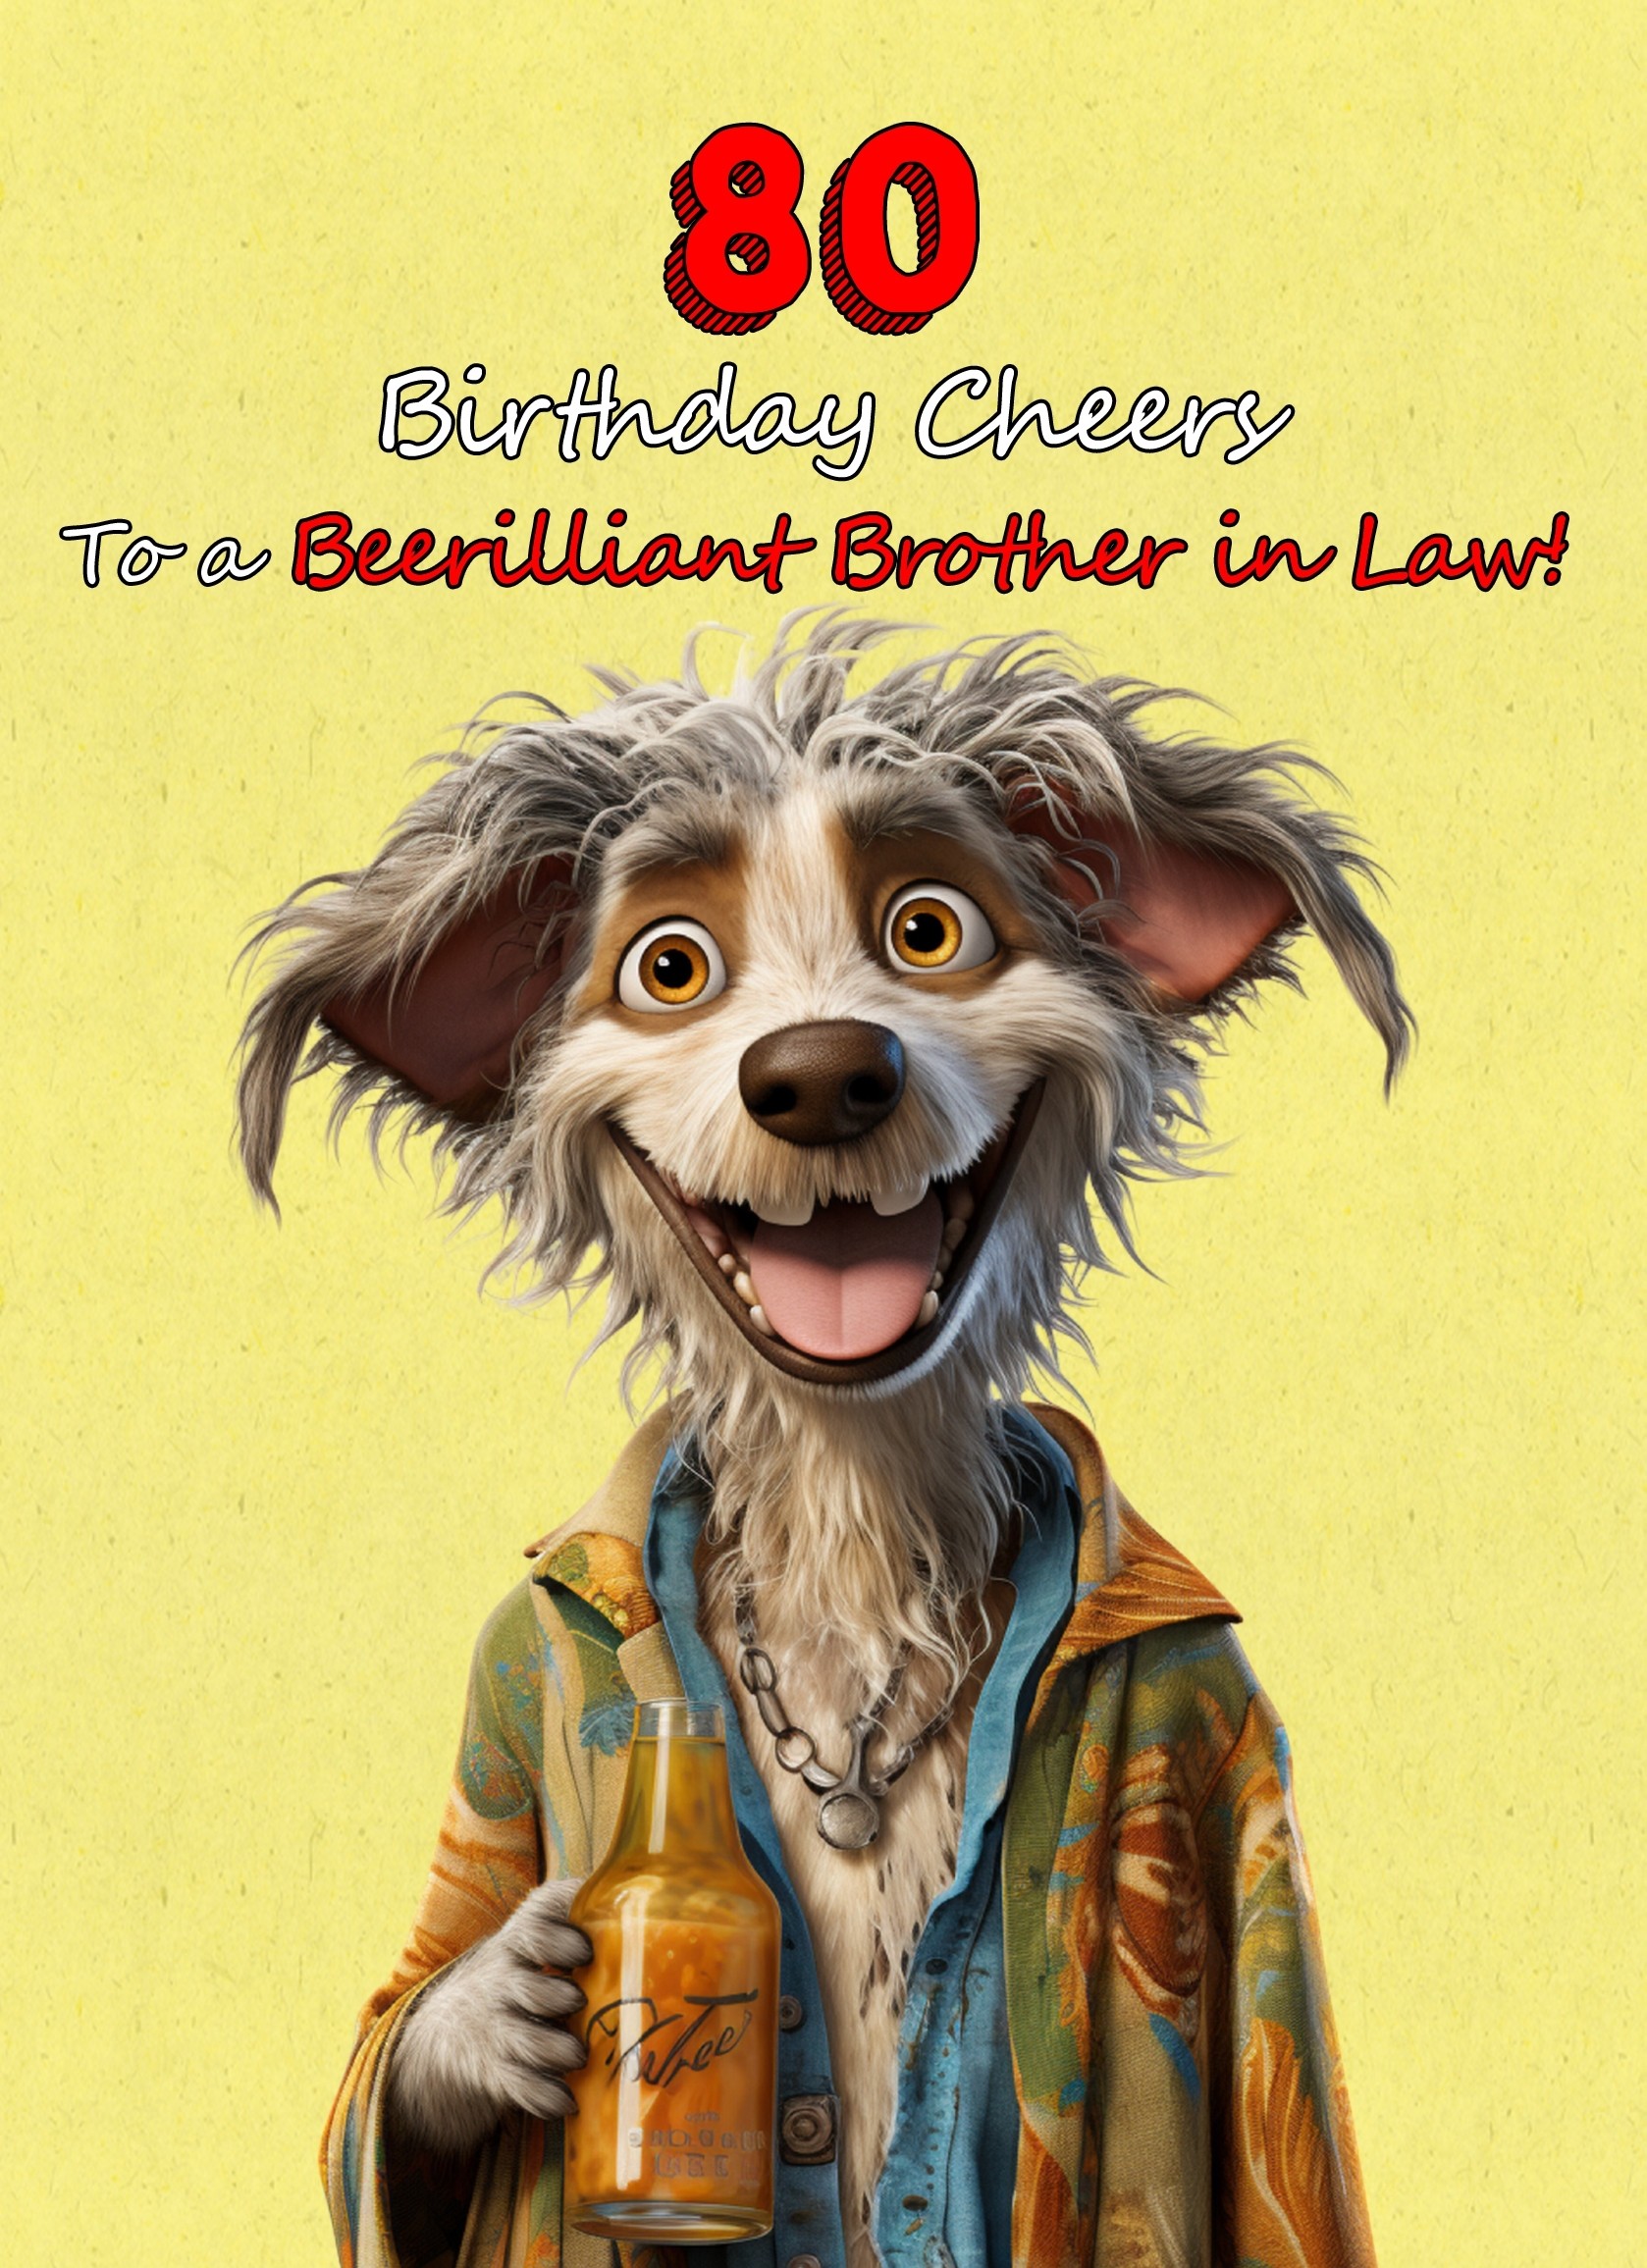 Brother in Law 80th Birthday Card (Funny Beerilliant Birthday Cheers, Design 2)